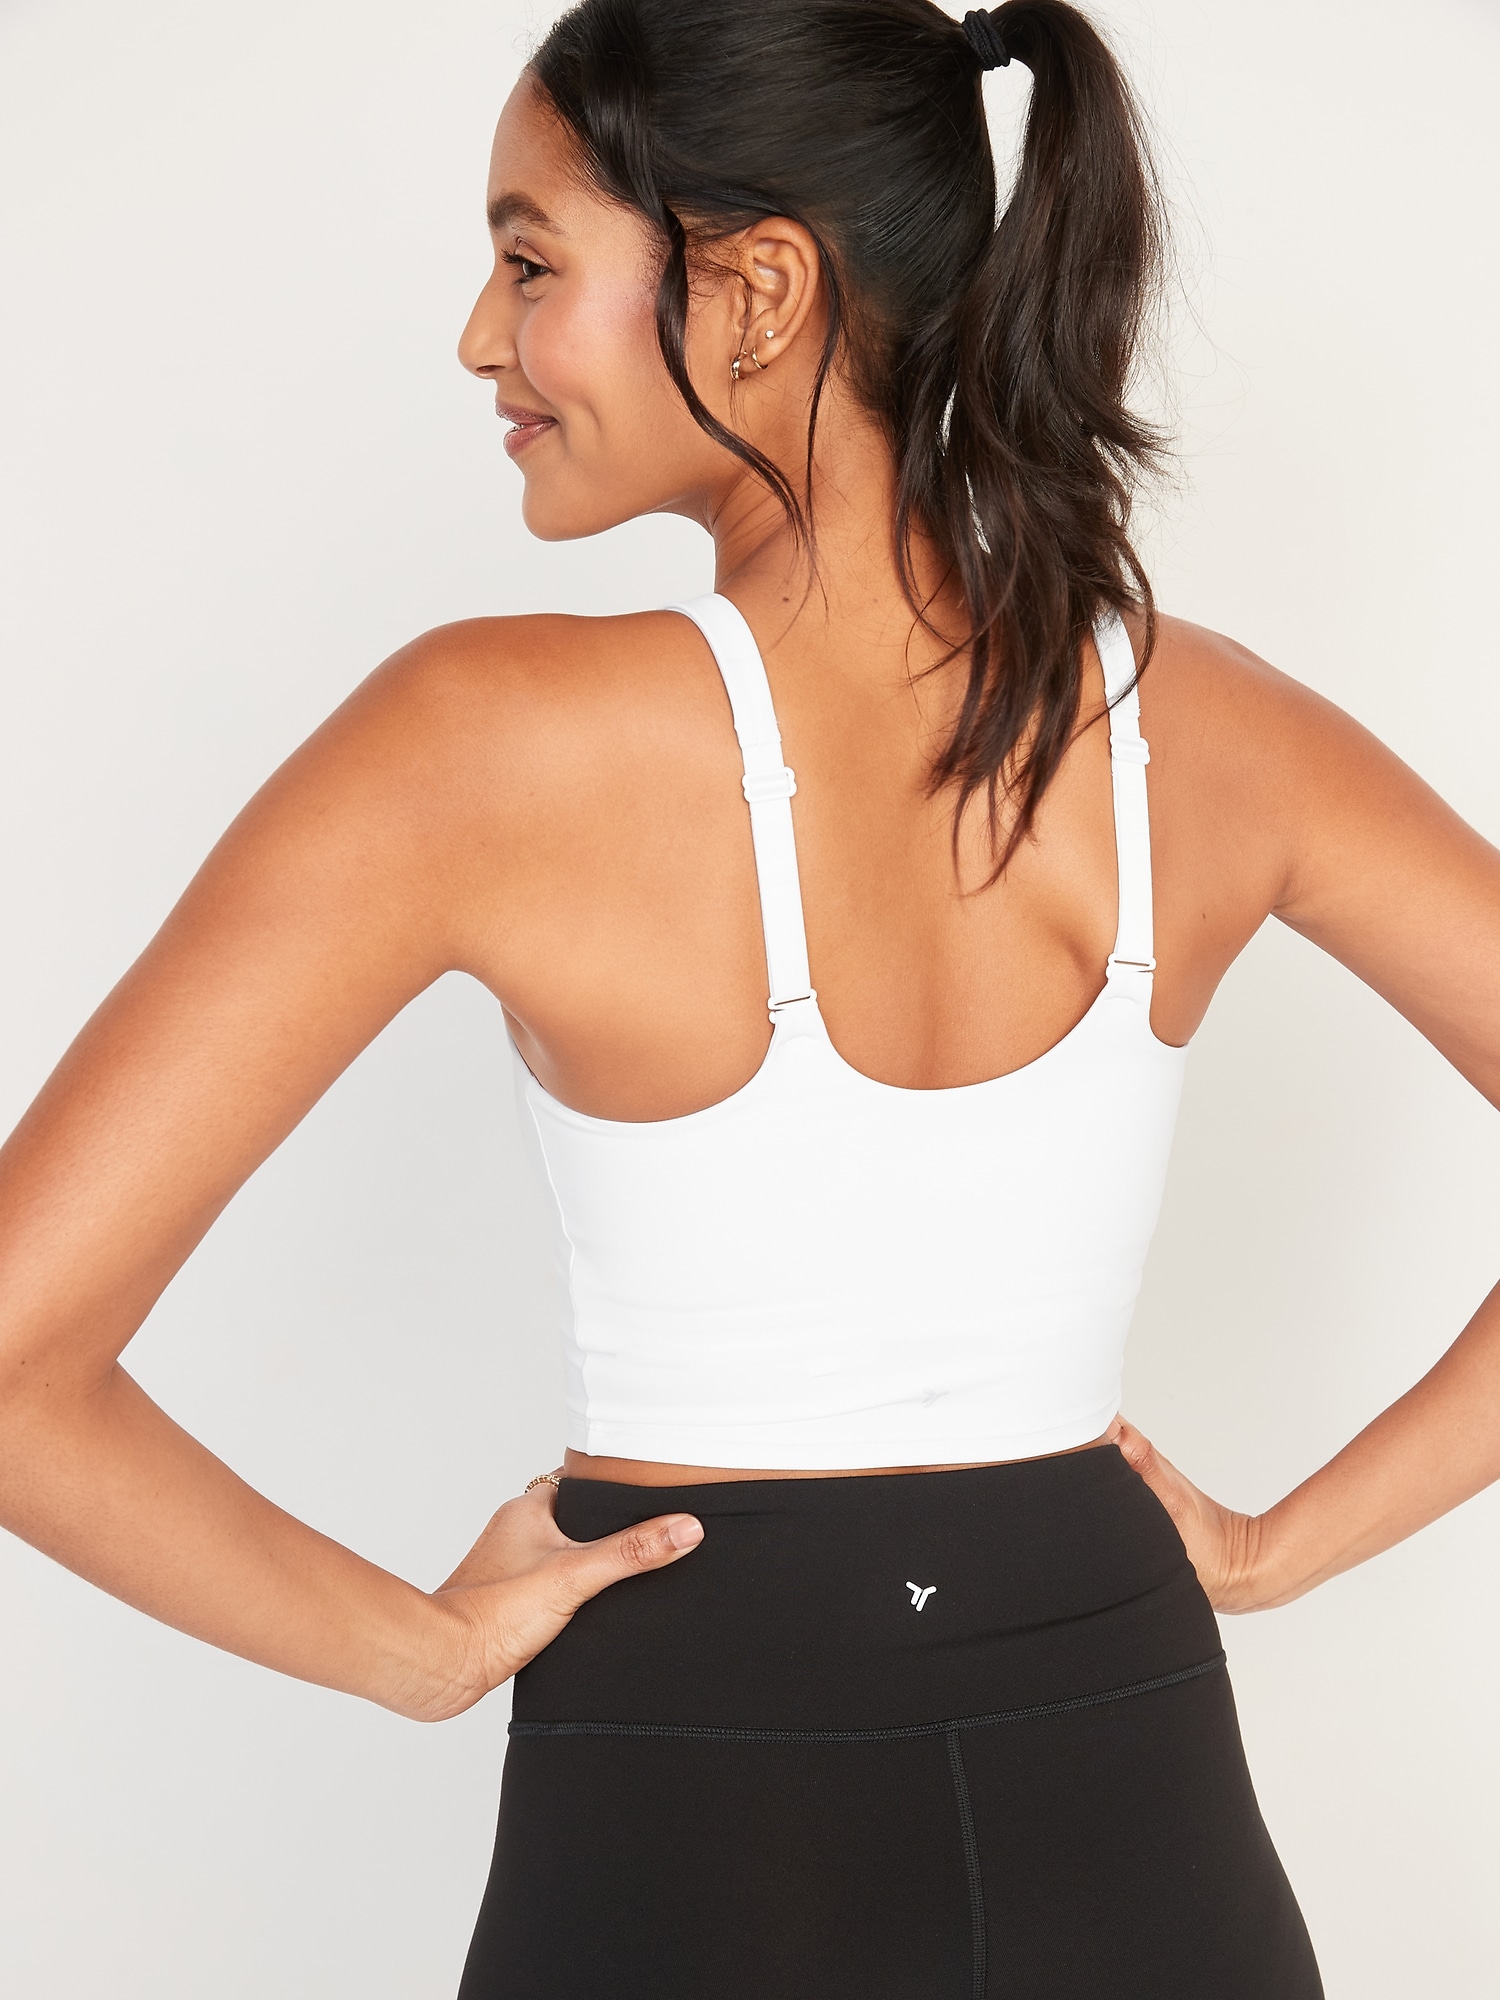 Old Navy - Light Support PowerSoft Adjustable Longline Sports Bra for Women  white